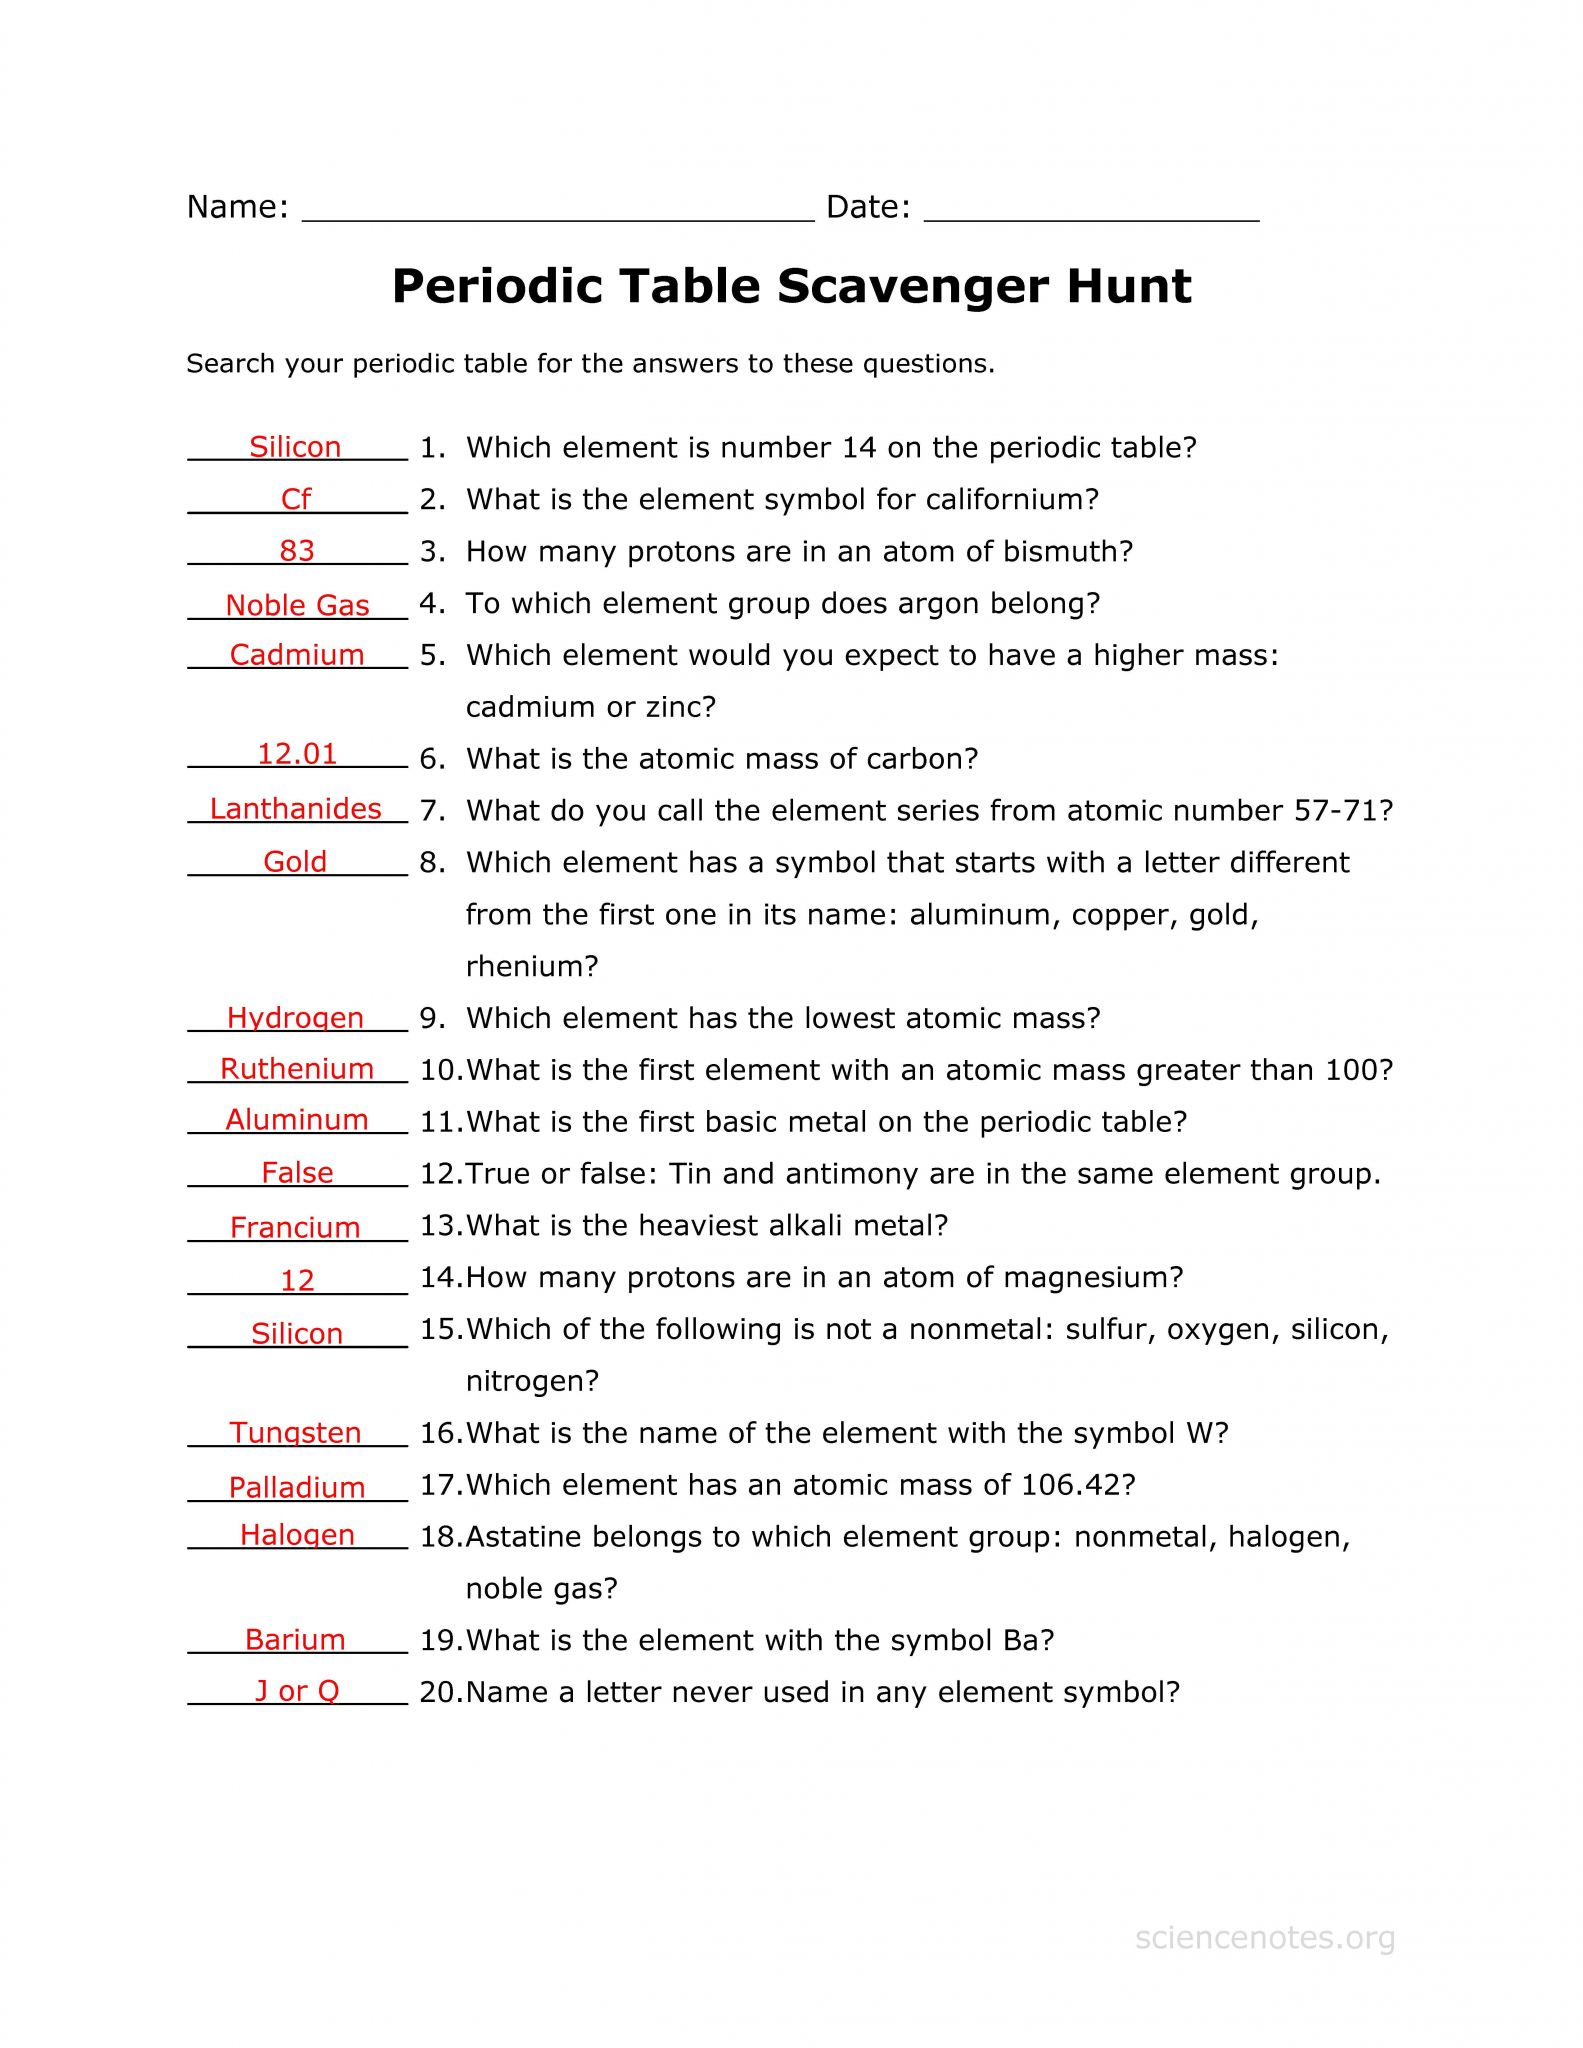 Potential Energy Worksheet Answers as Well as Answer Key to the Periodic Table Scavenger Hunt Worksheet Related